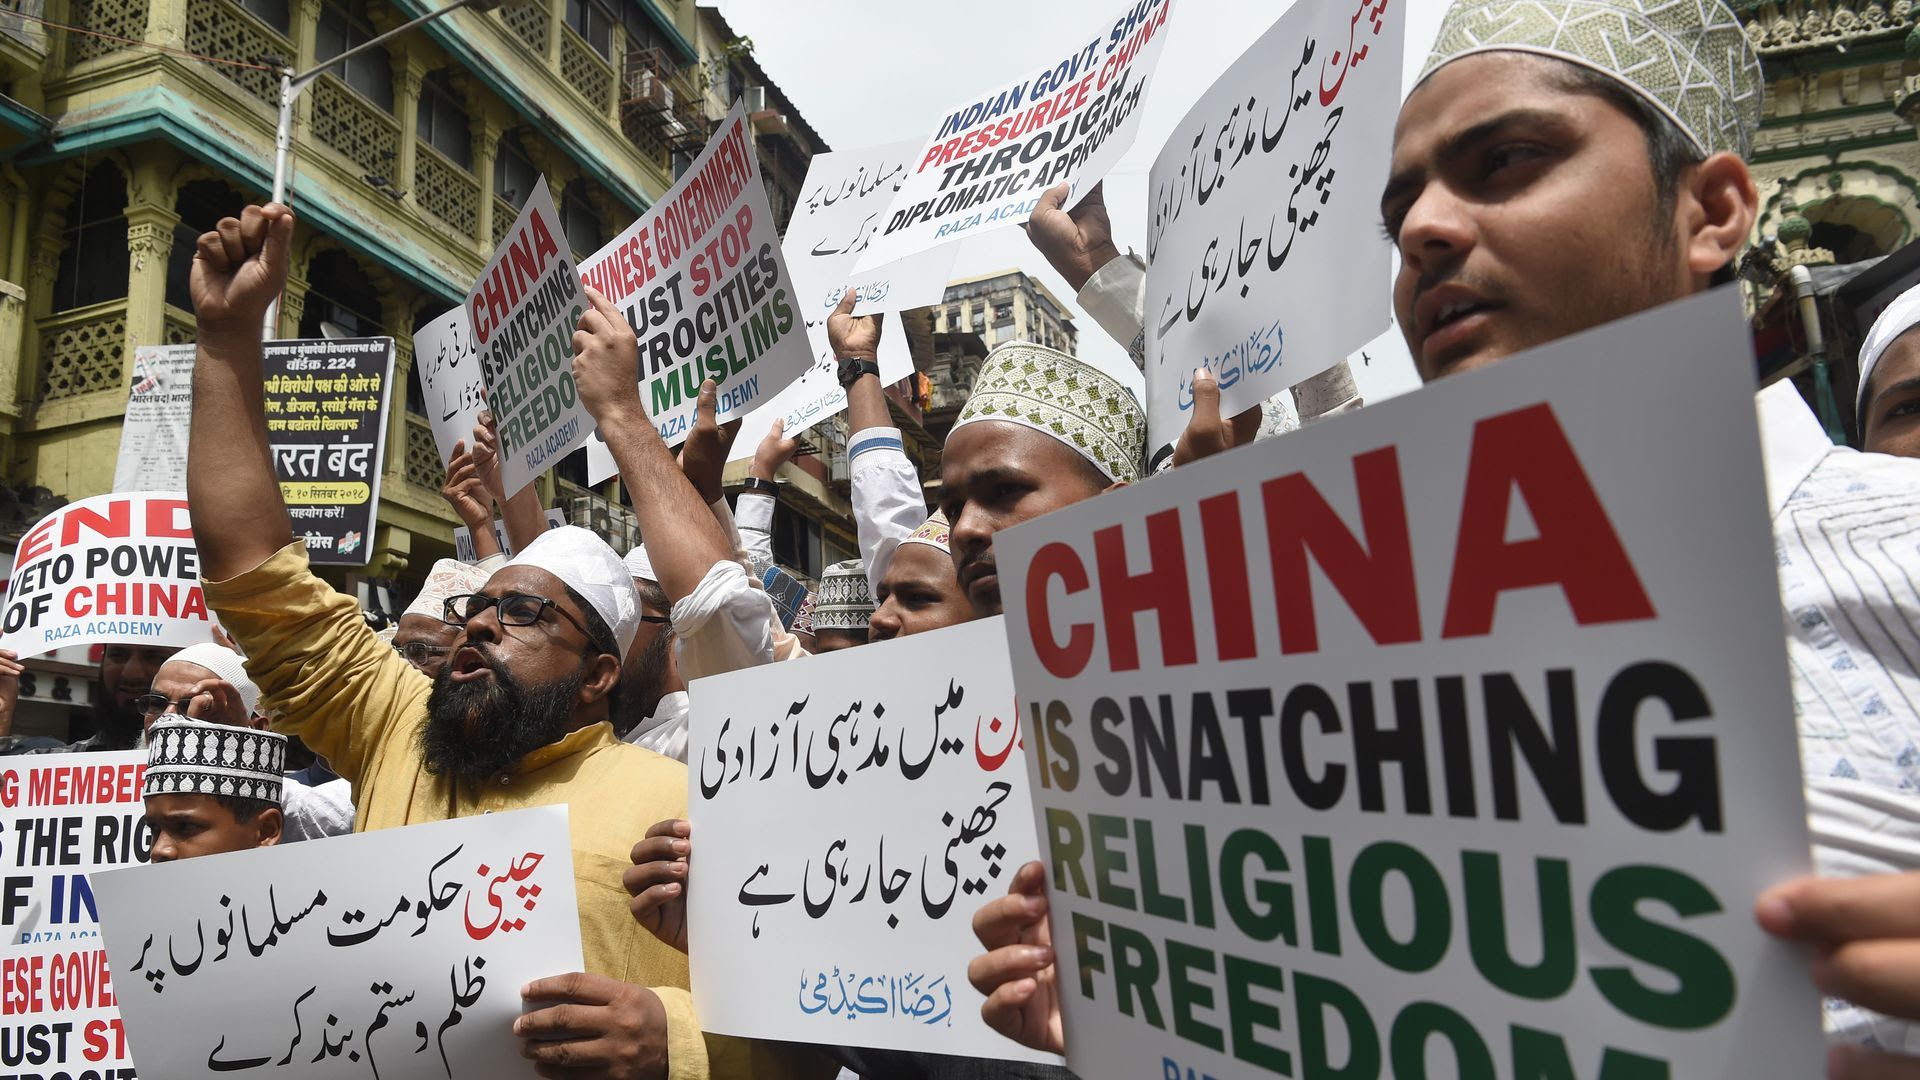 Protesters with signs about China snatching religious freedom